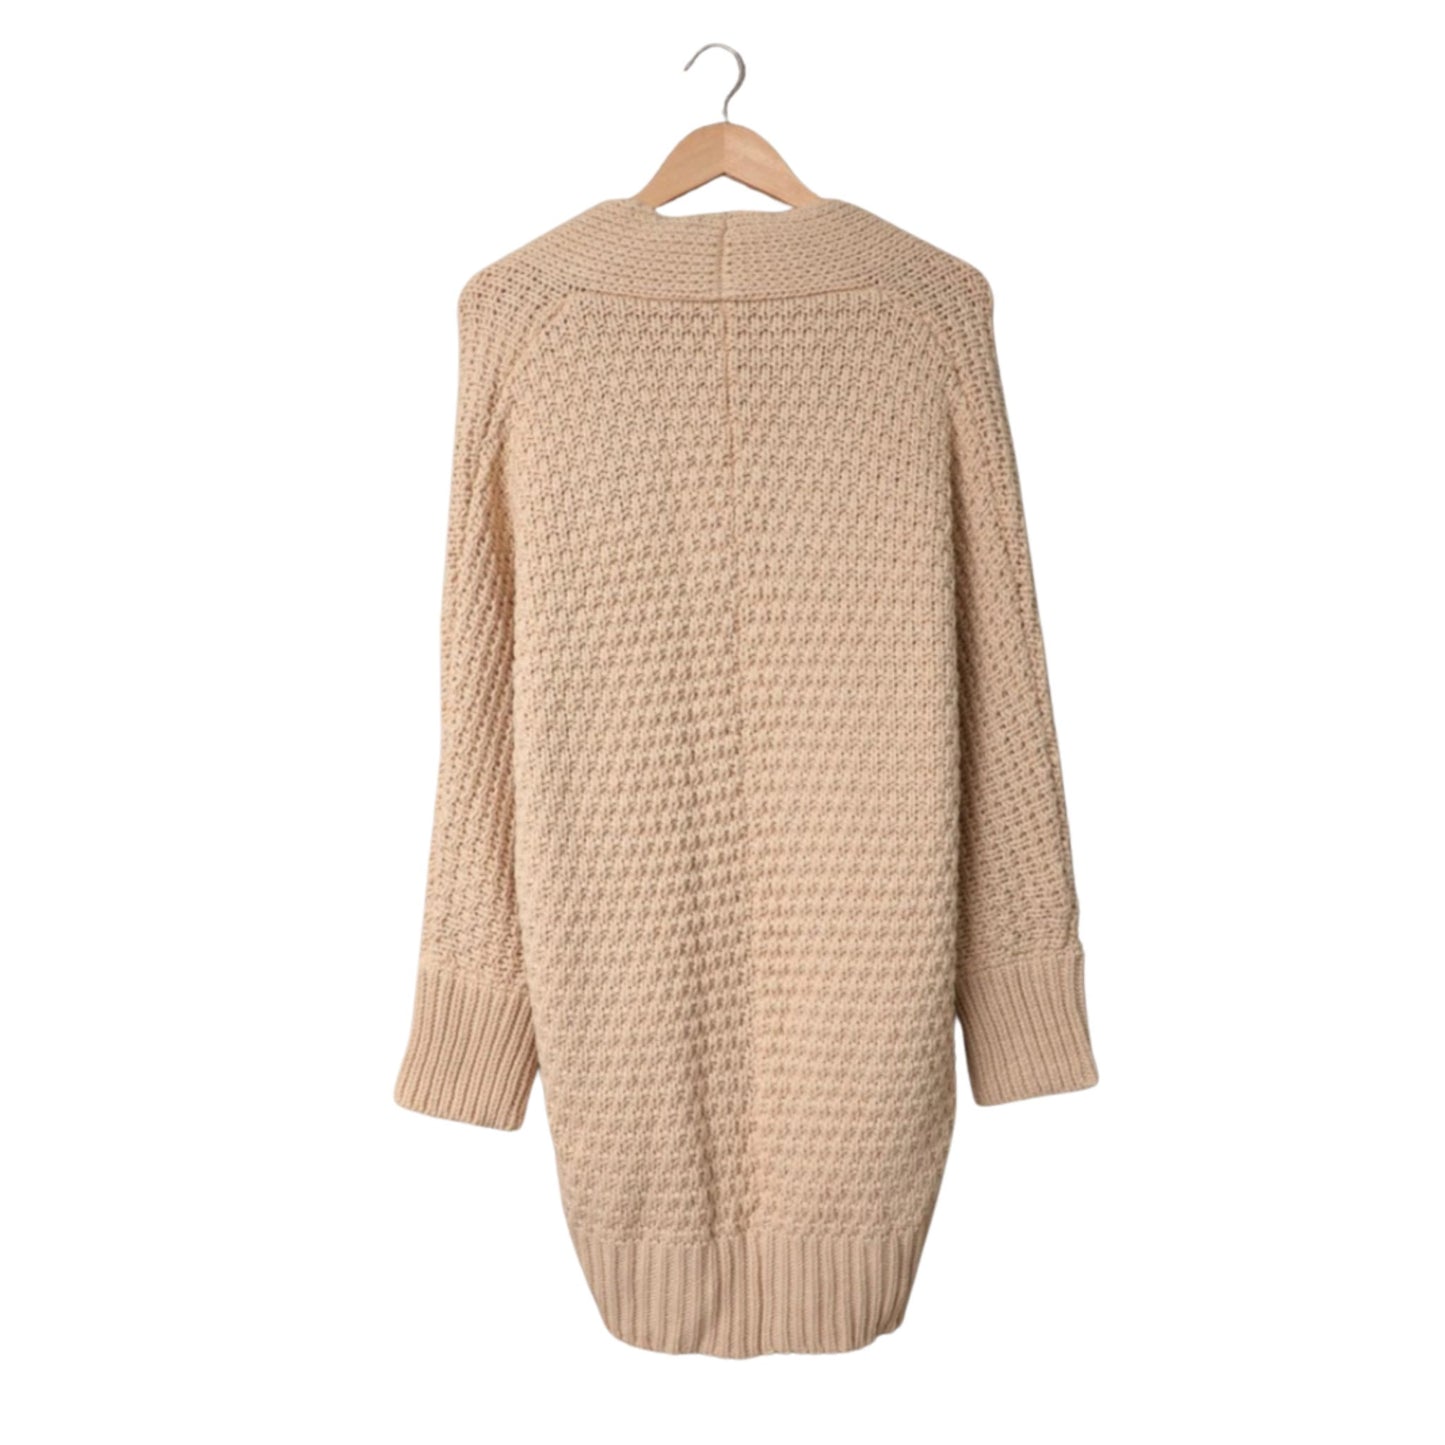 Khaki open front pocket casual knitted cardigan 